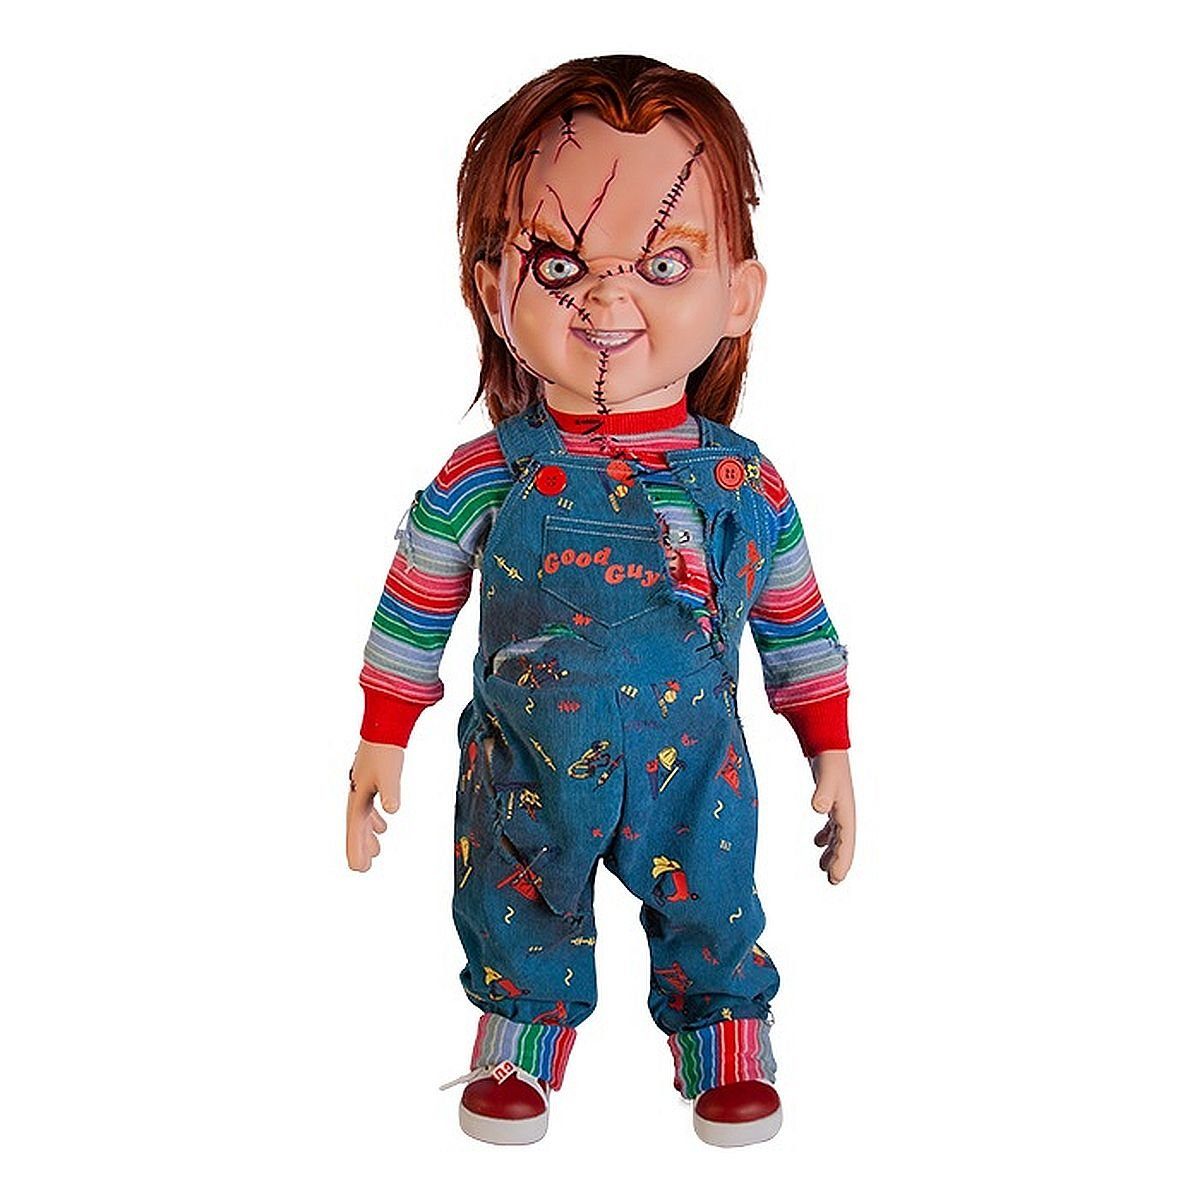 Trick or Treat Actionfigur Seed of Chucky Figur Scarred Chucky Doll 1:1 Replik